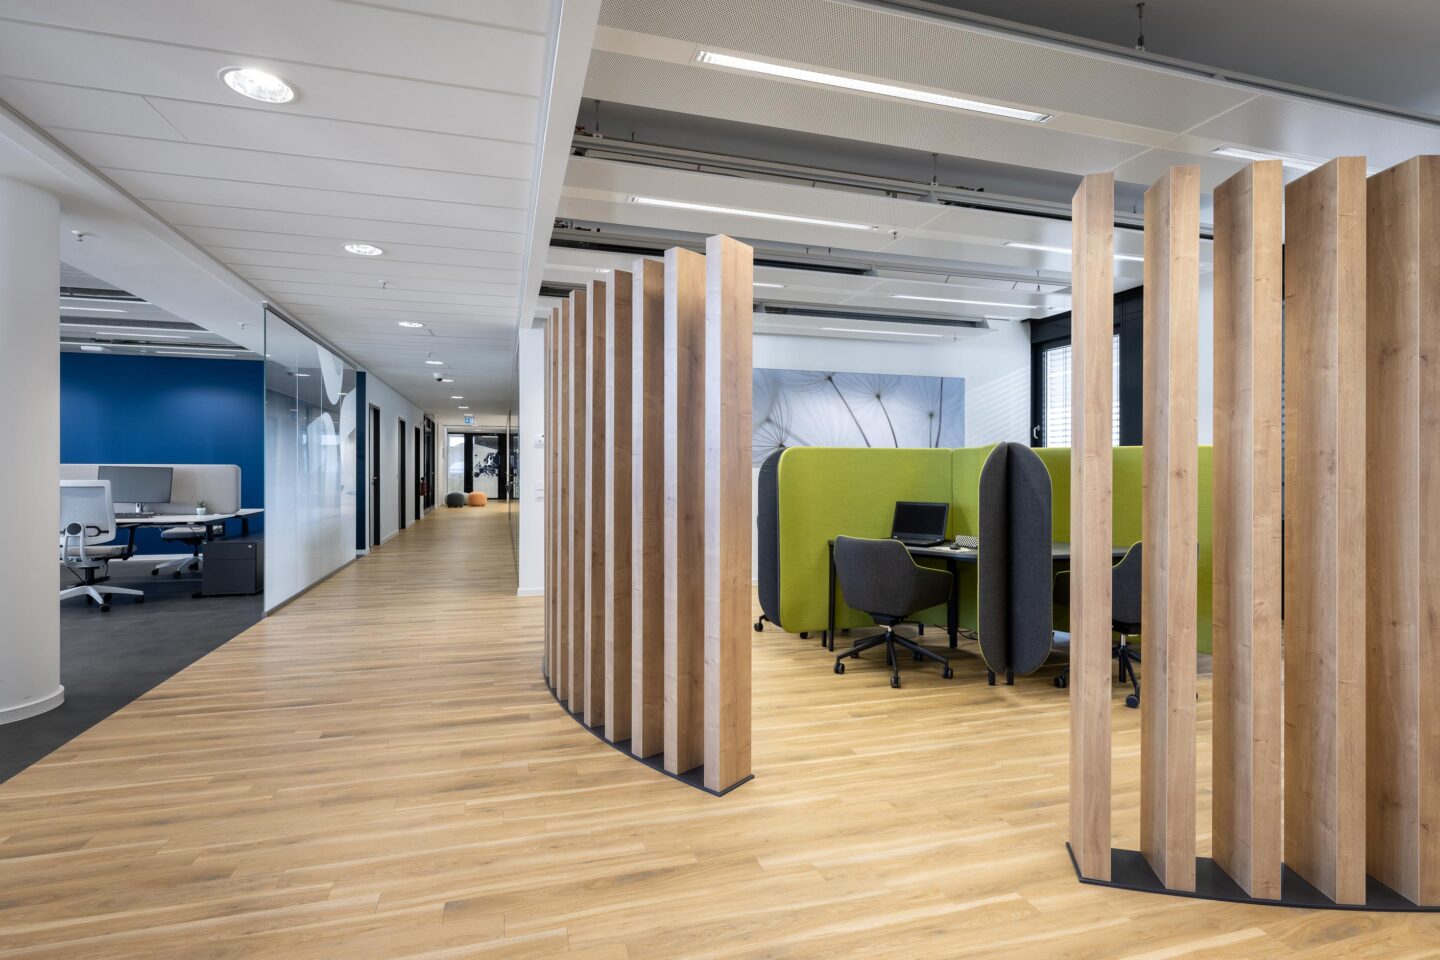 The attractive rooms - in Getinge's CI colours - will be available to both employees and clients from around the world as meeting places and for knowledge exchange purposes